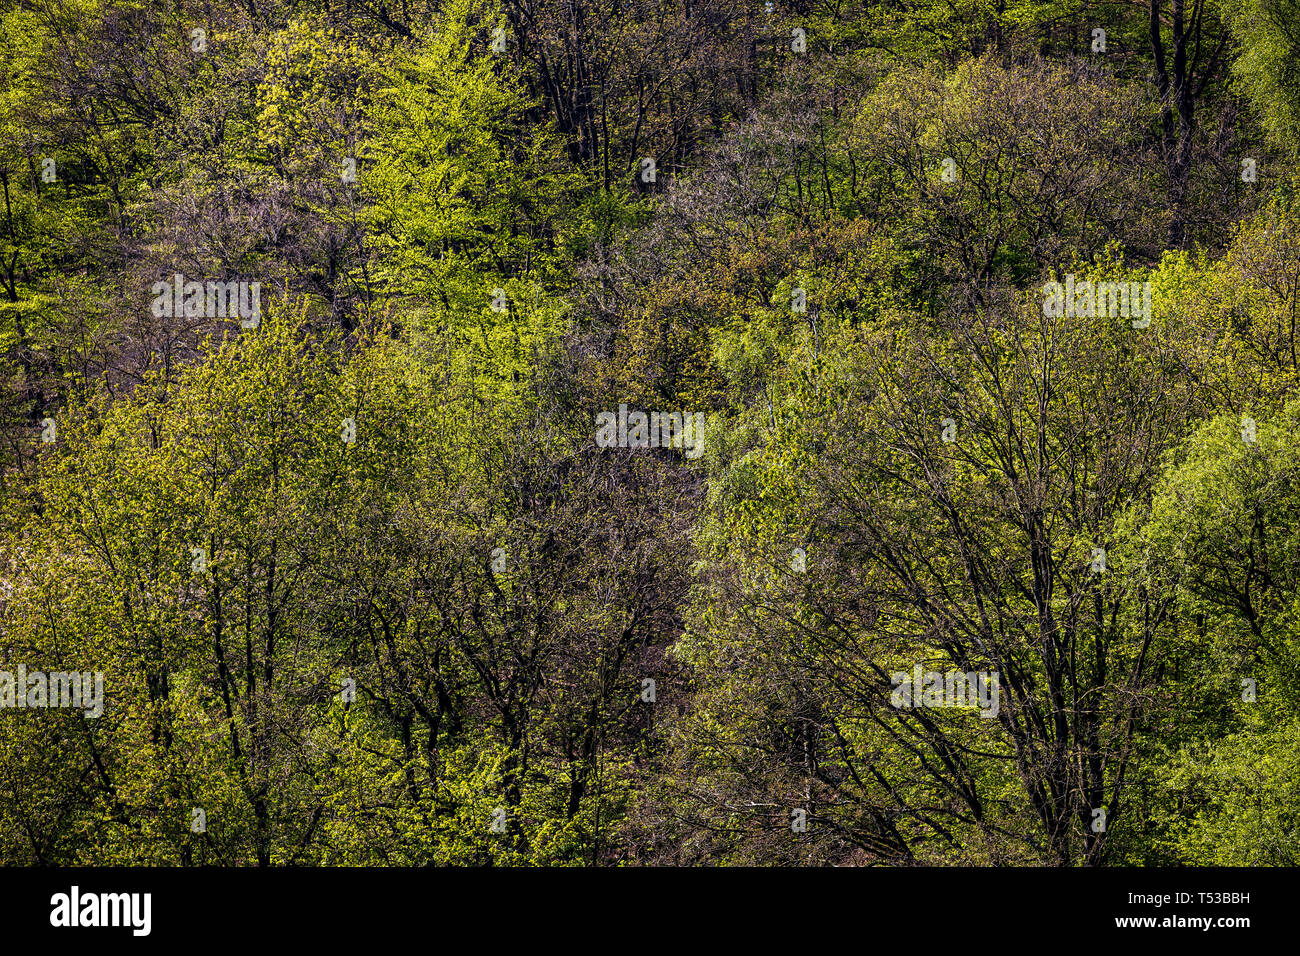 Spring foliage, deciduous forest, Germany Stock Photo